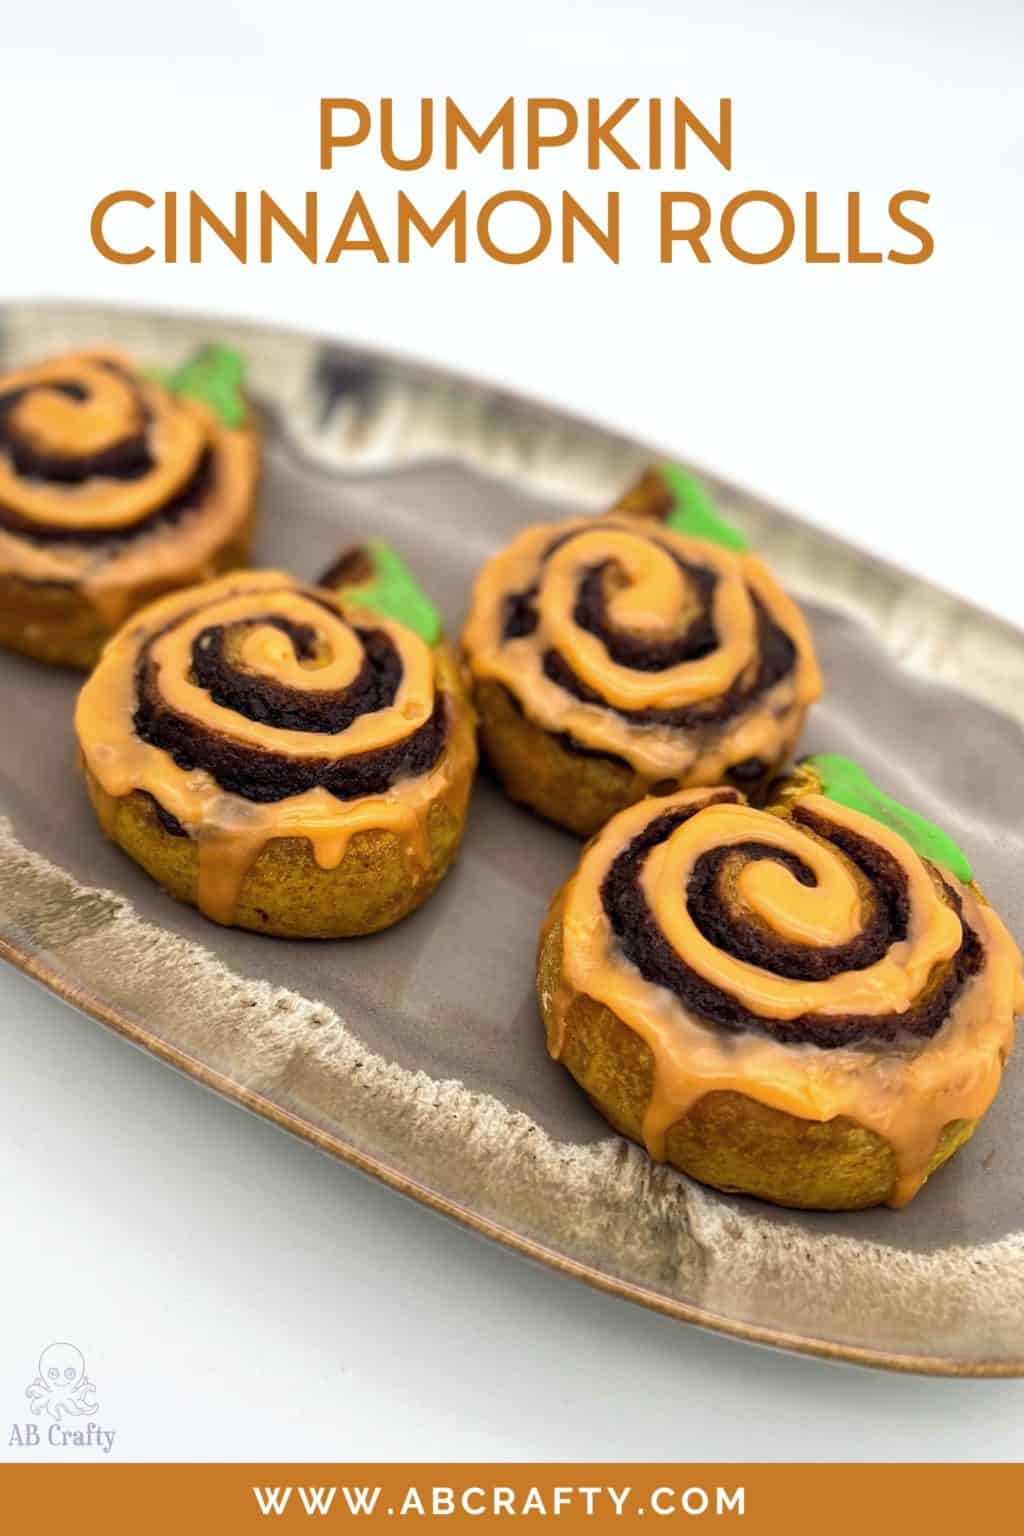 finished wildgrain cinnamon rolls with orange icing in a spiral and green icing for the stem and the title "pumpkin cinnamon rolls, abcrafty.com"